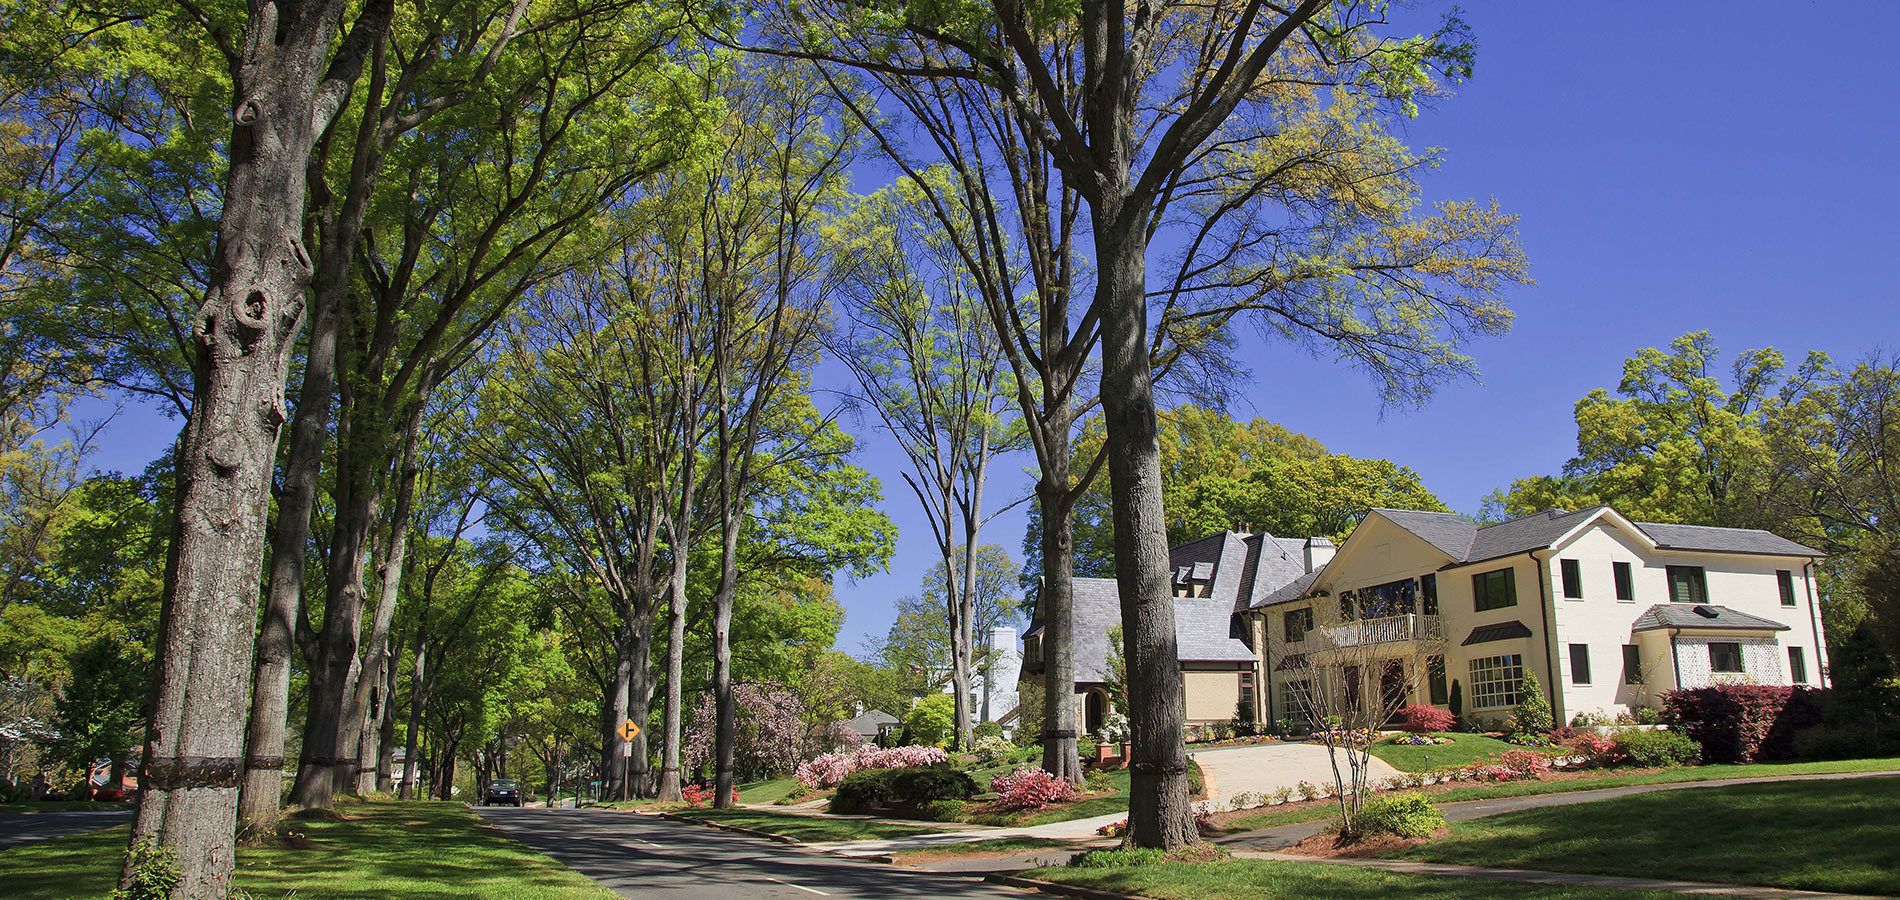 Georgetown Homes for Sale in Cary NC